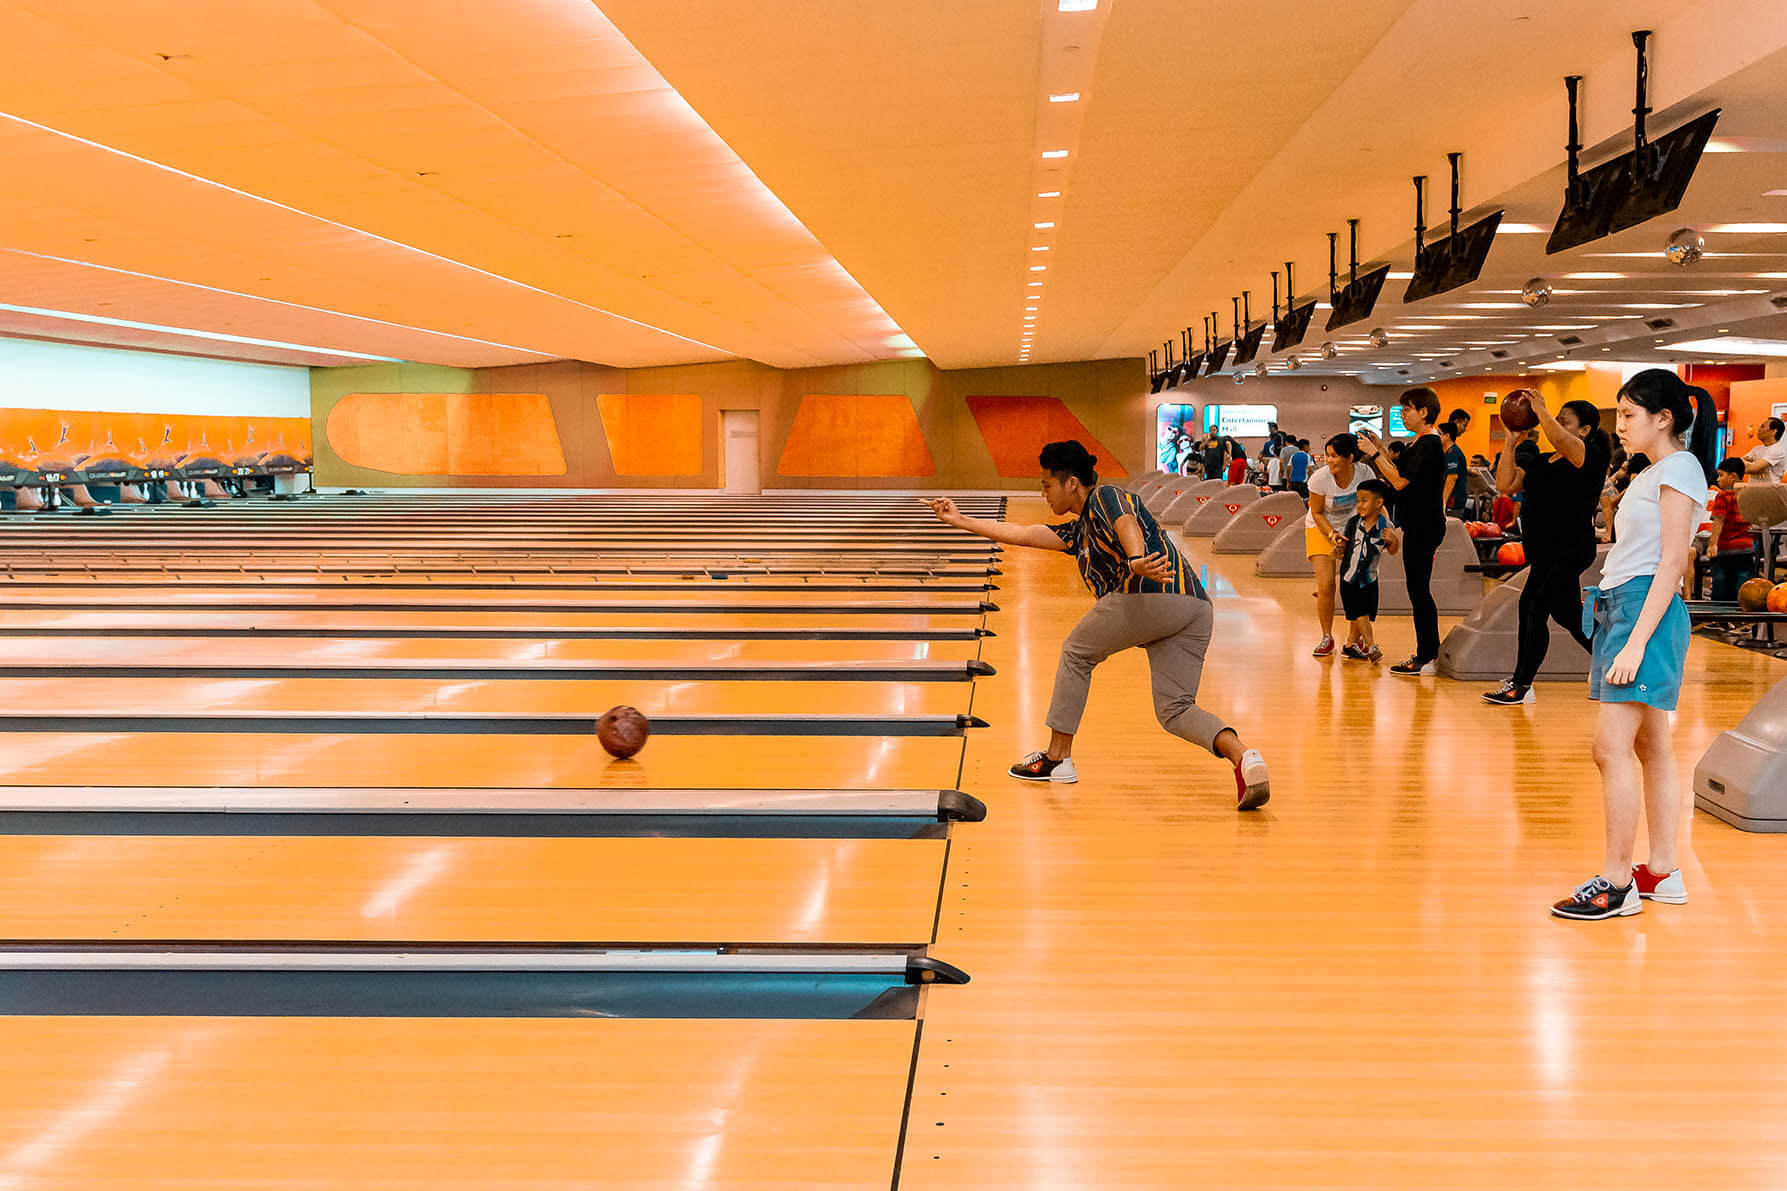 strike-one-family-day-2019-celebrating-family-giving-and-community-through-bowling